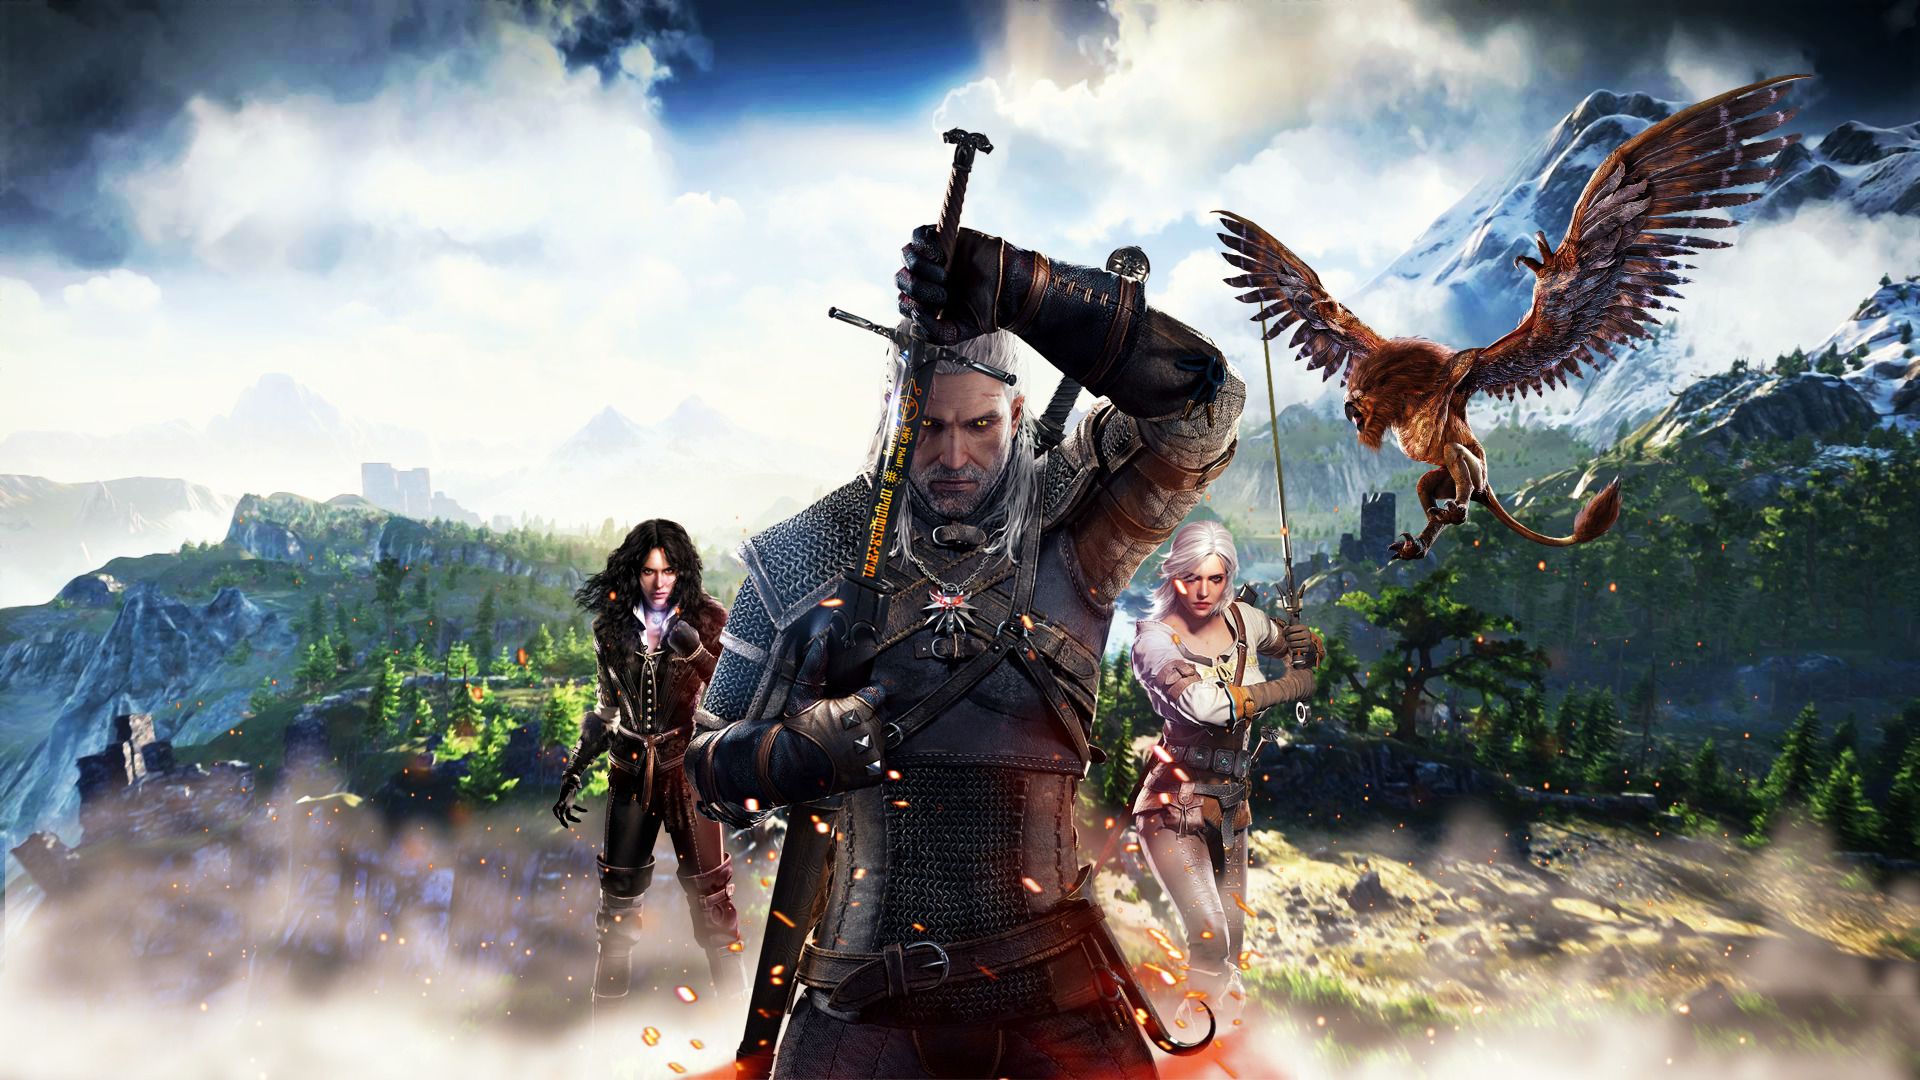 The Witcher 4 Confirmed by CD Projekt Red, Development will start after Cyberpunk 2077 Release